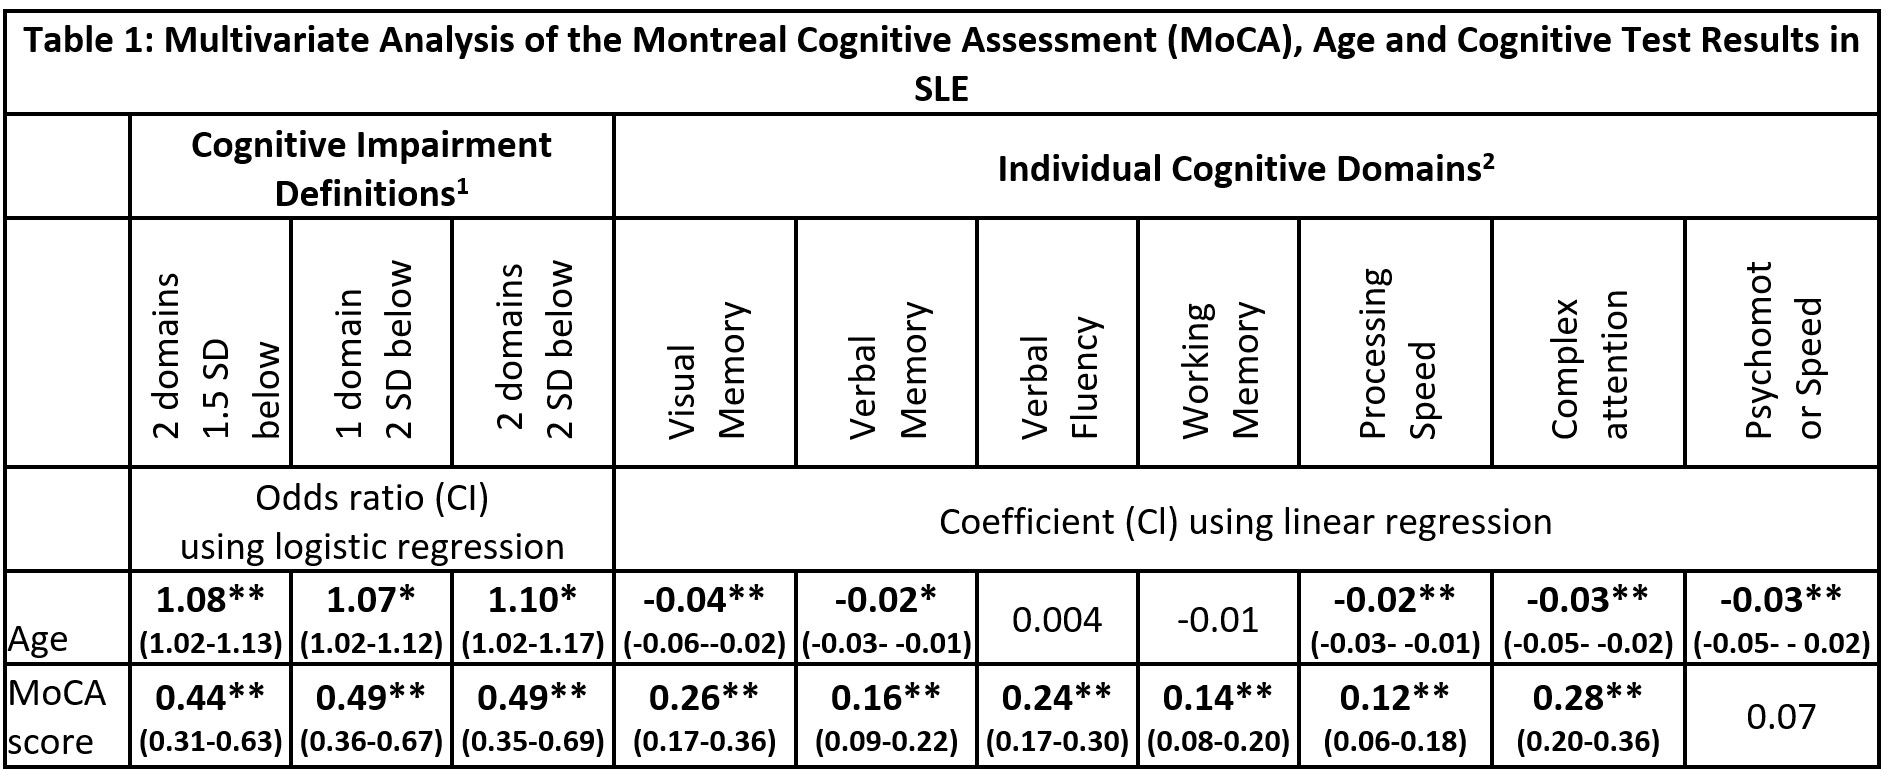 evaluation-of-the-montreal-cognitive-assessment-as-a-screening-tool-for-cognitive-dysfunction-in